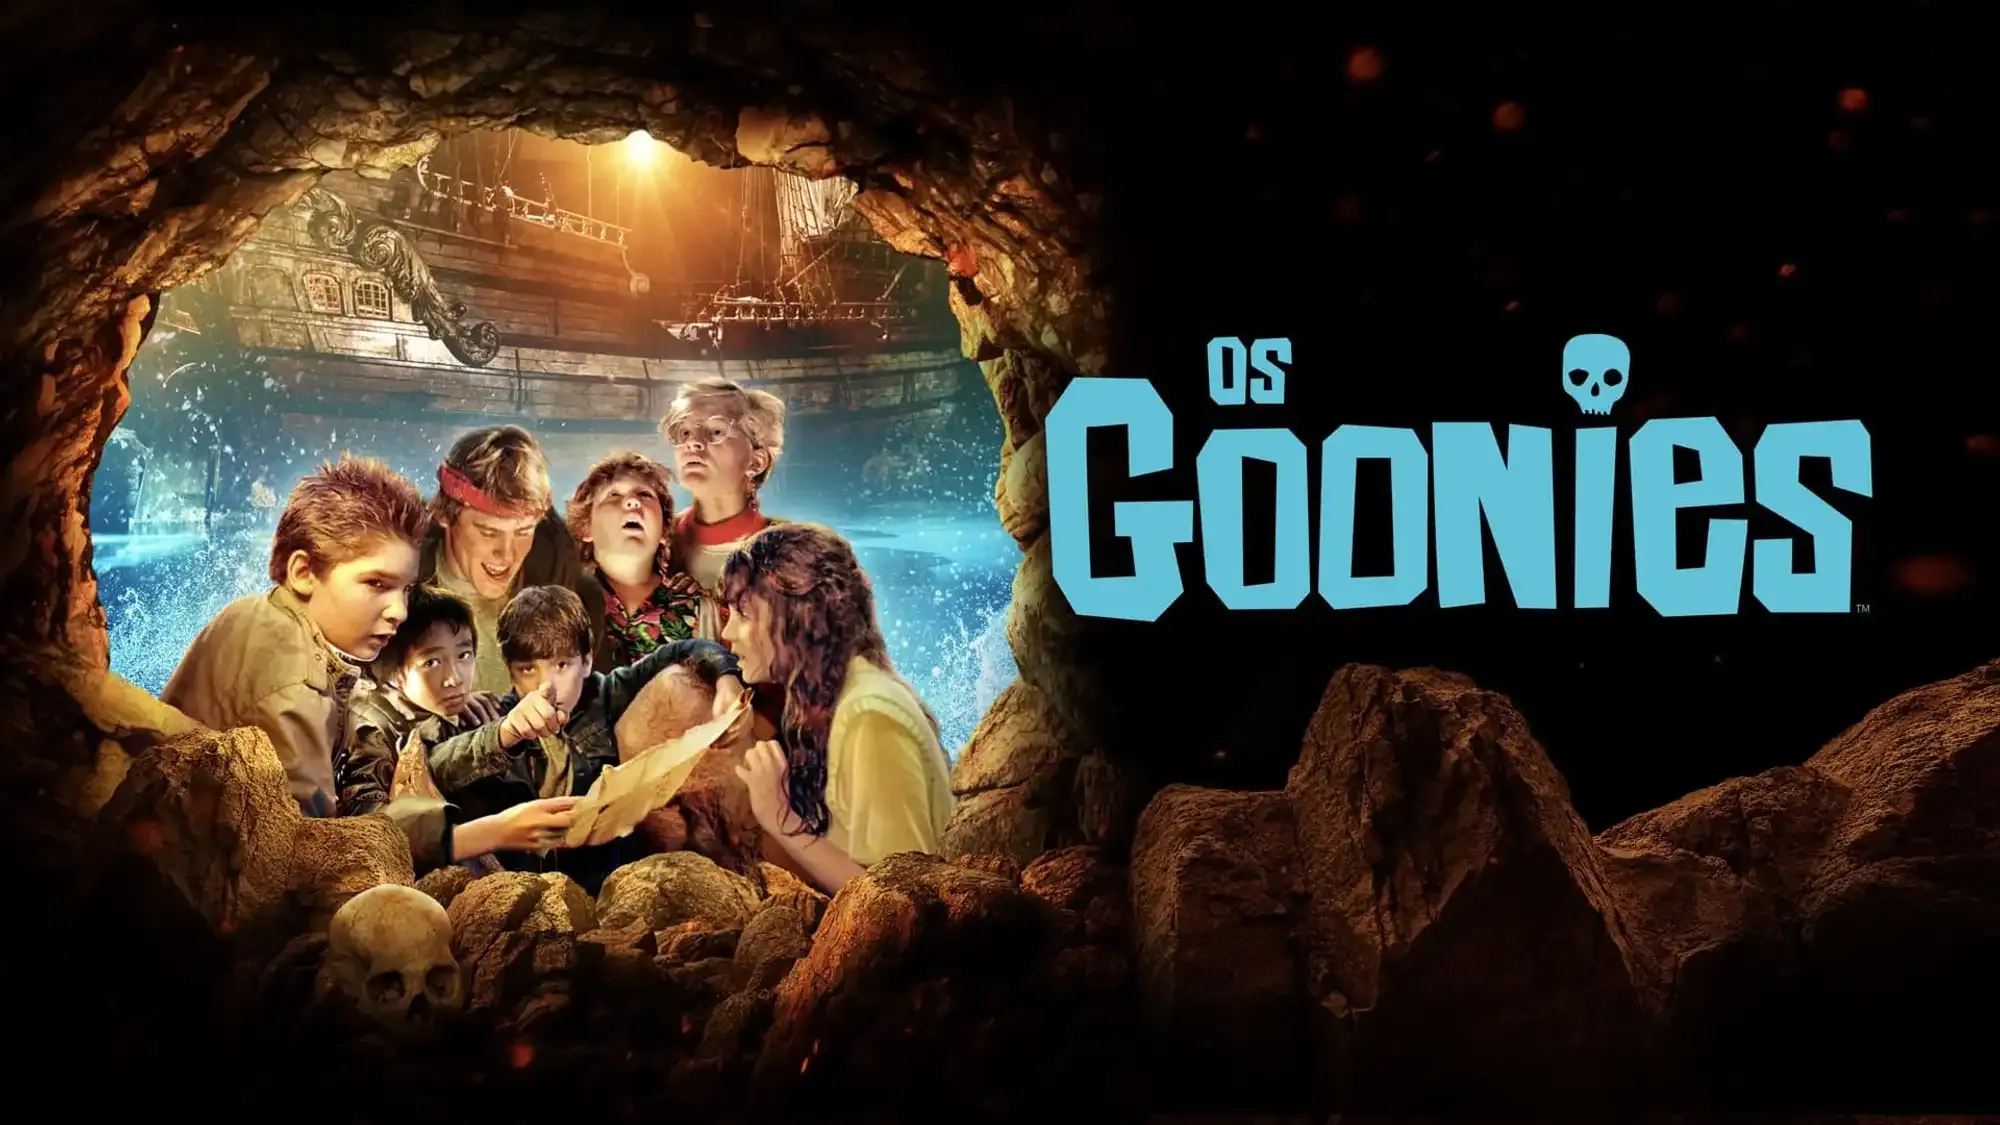 The Goonies movie review